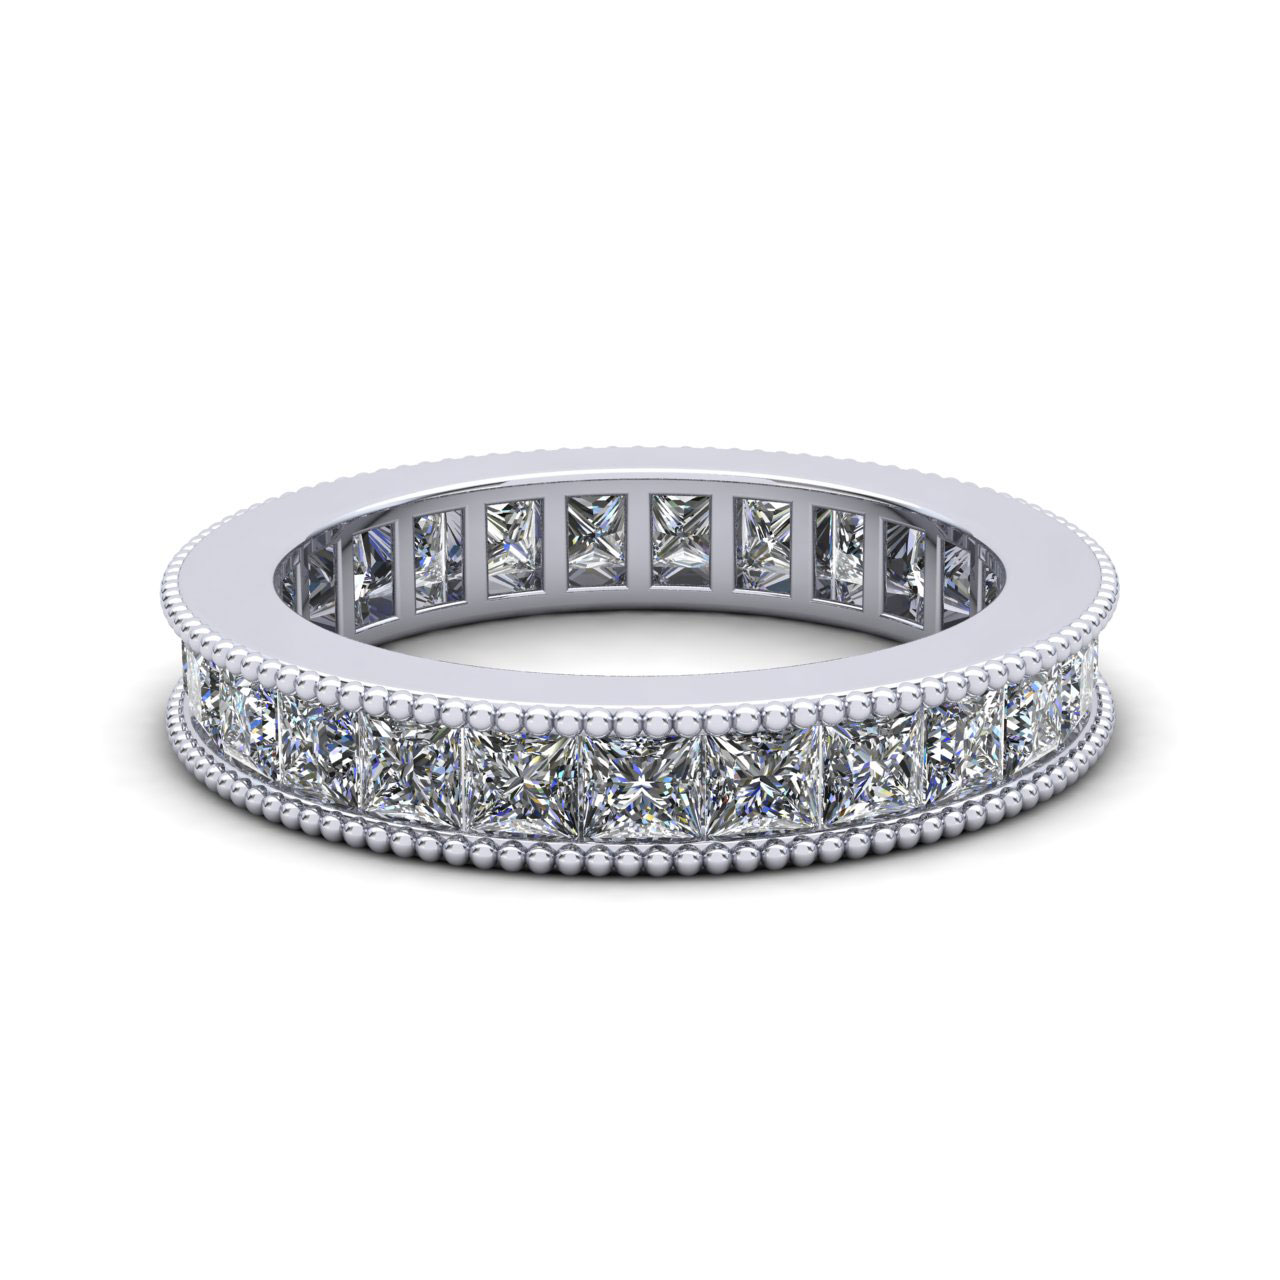 Jewel We Sell Natural 3.75Ct Princess Diamond Channel Set Milgrain Ladies Anniversary Wedding Eternity Band Ring Solid 18k White Gold G SI1